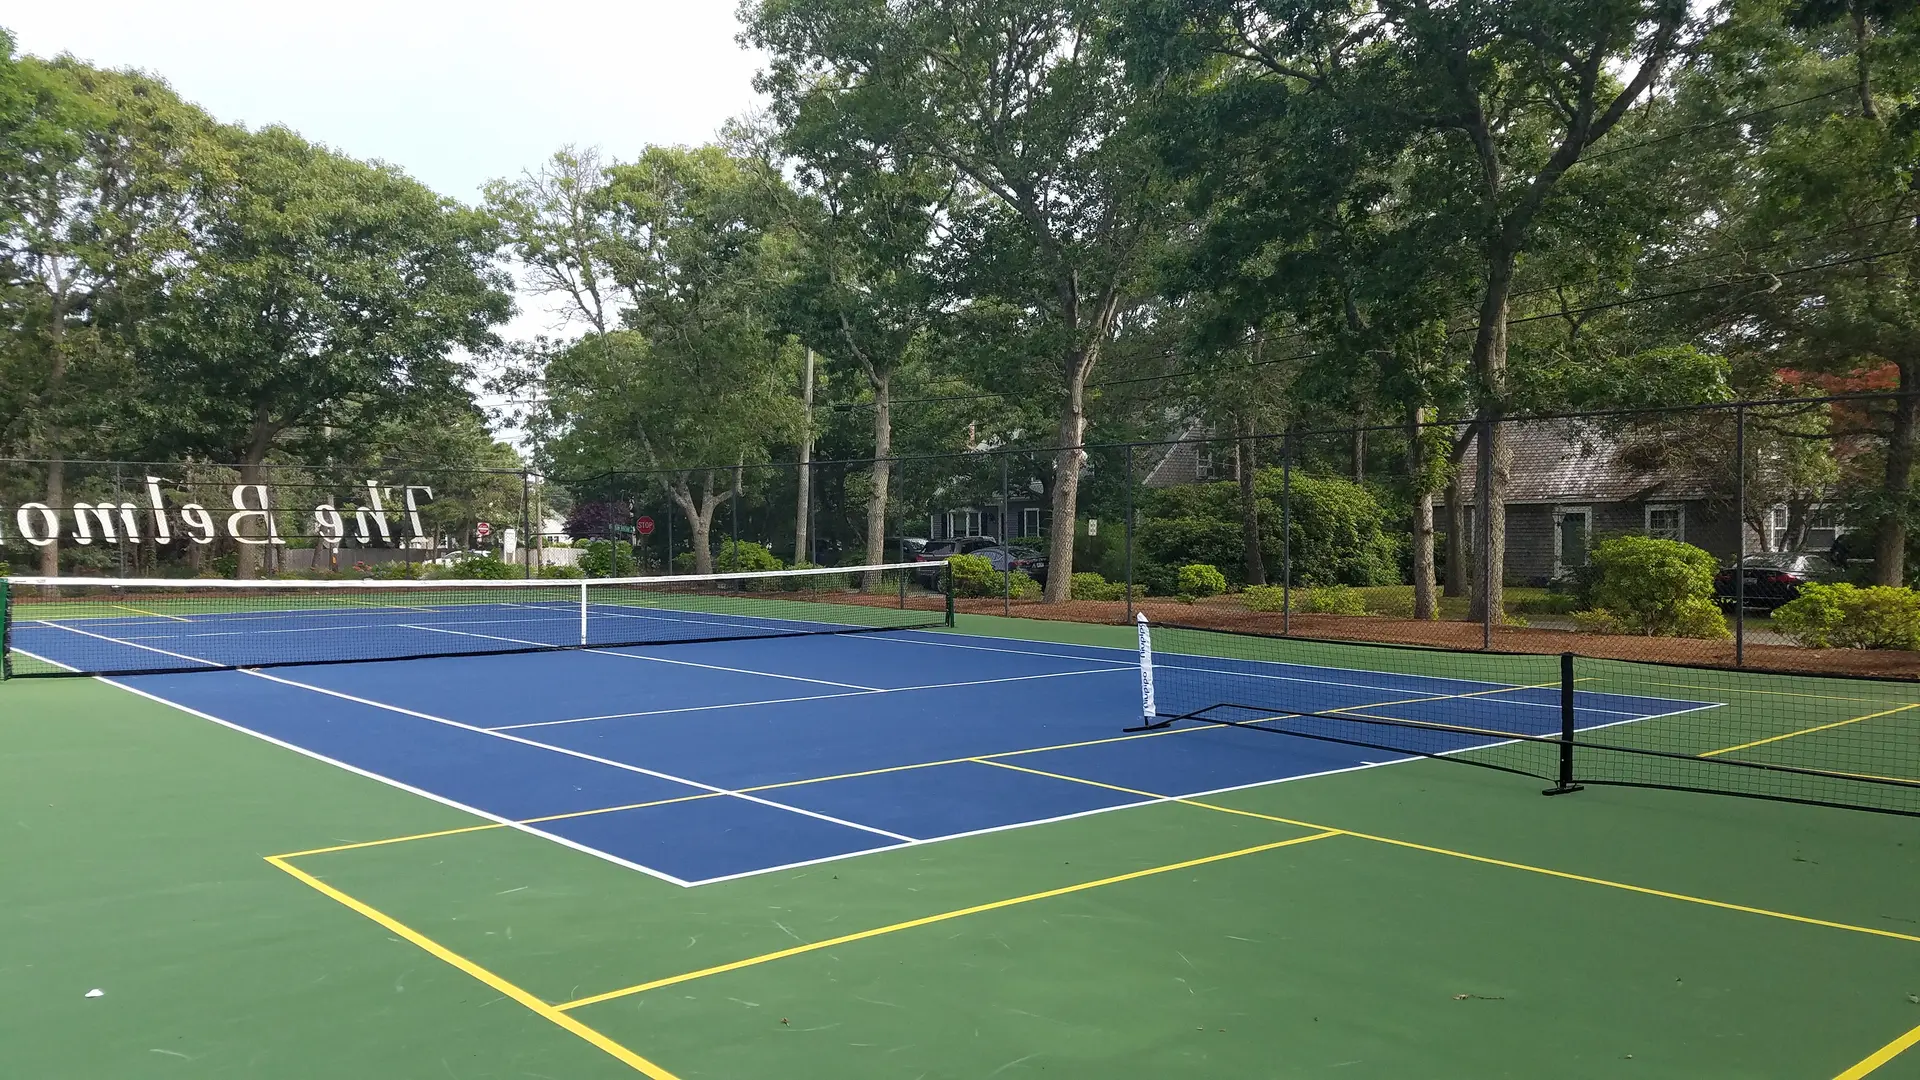 A tennis court with trees in the background.